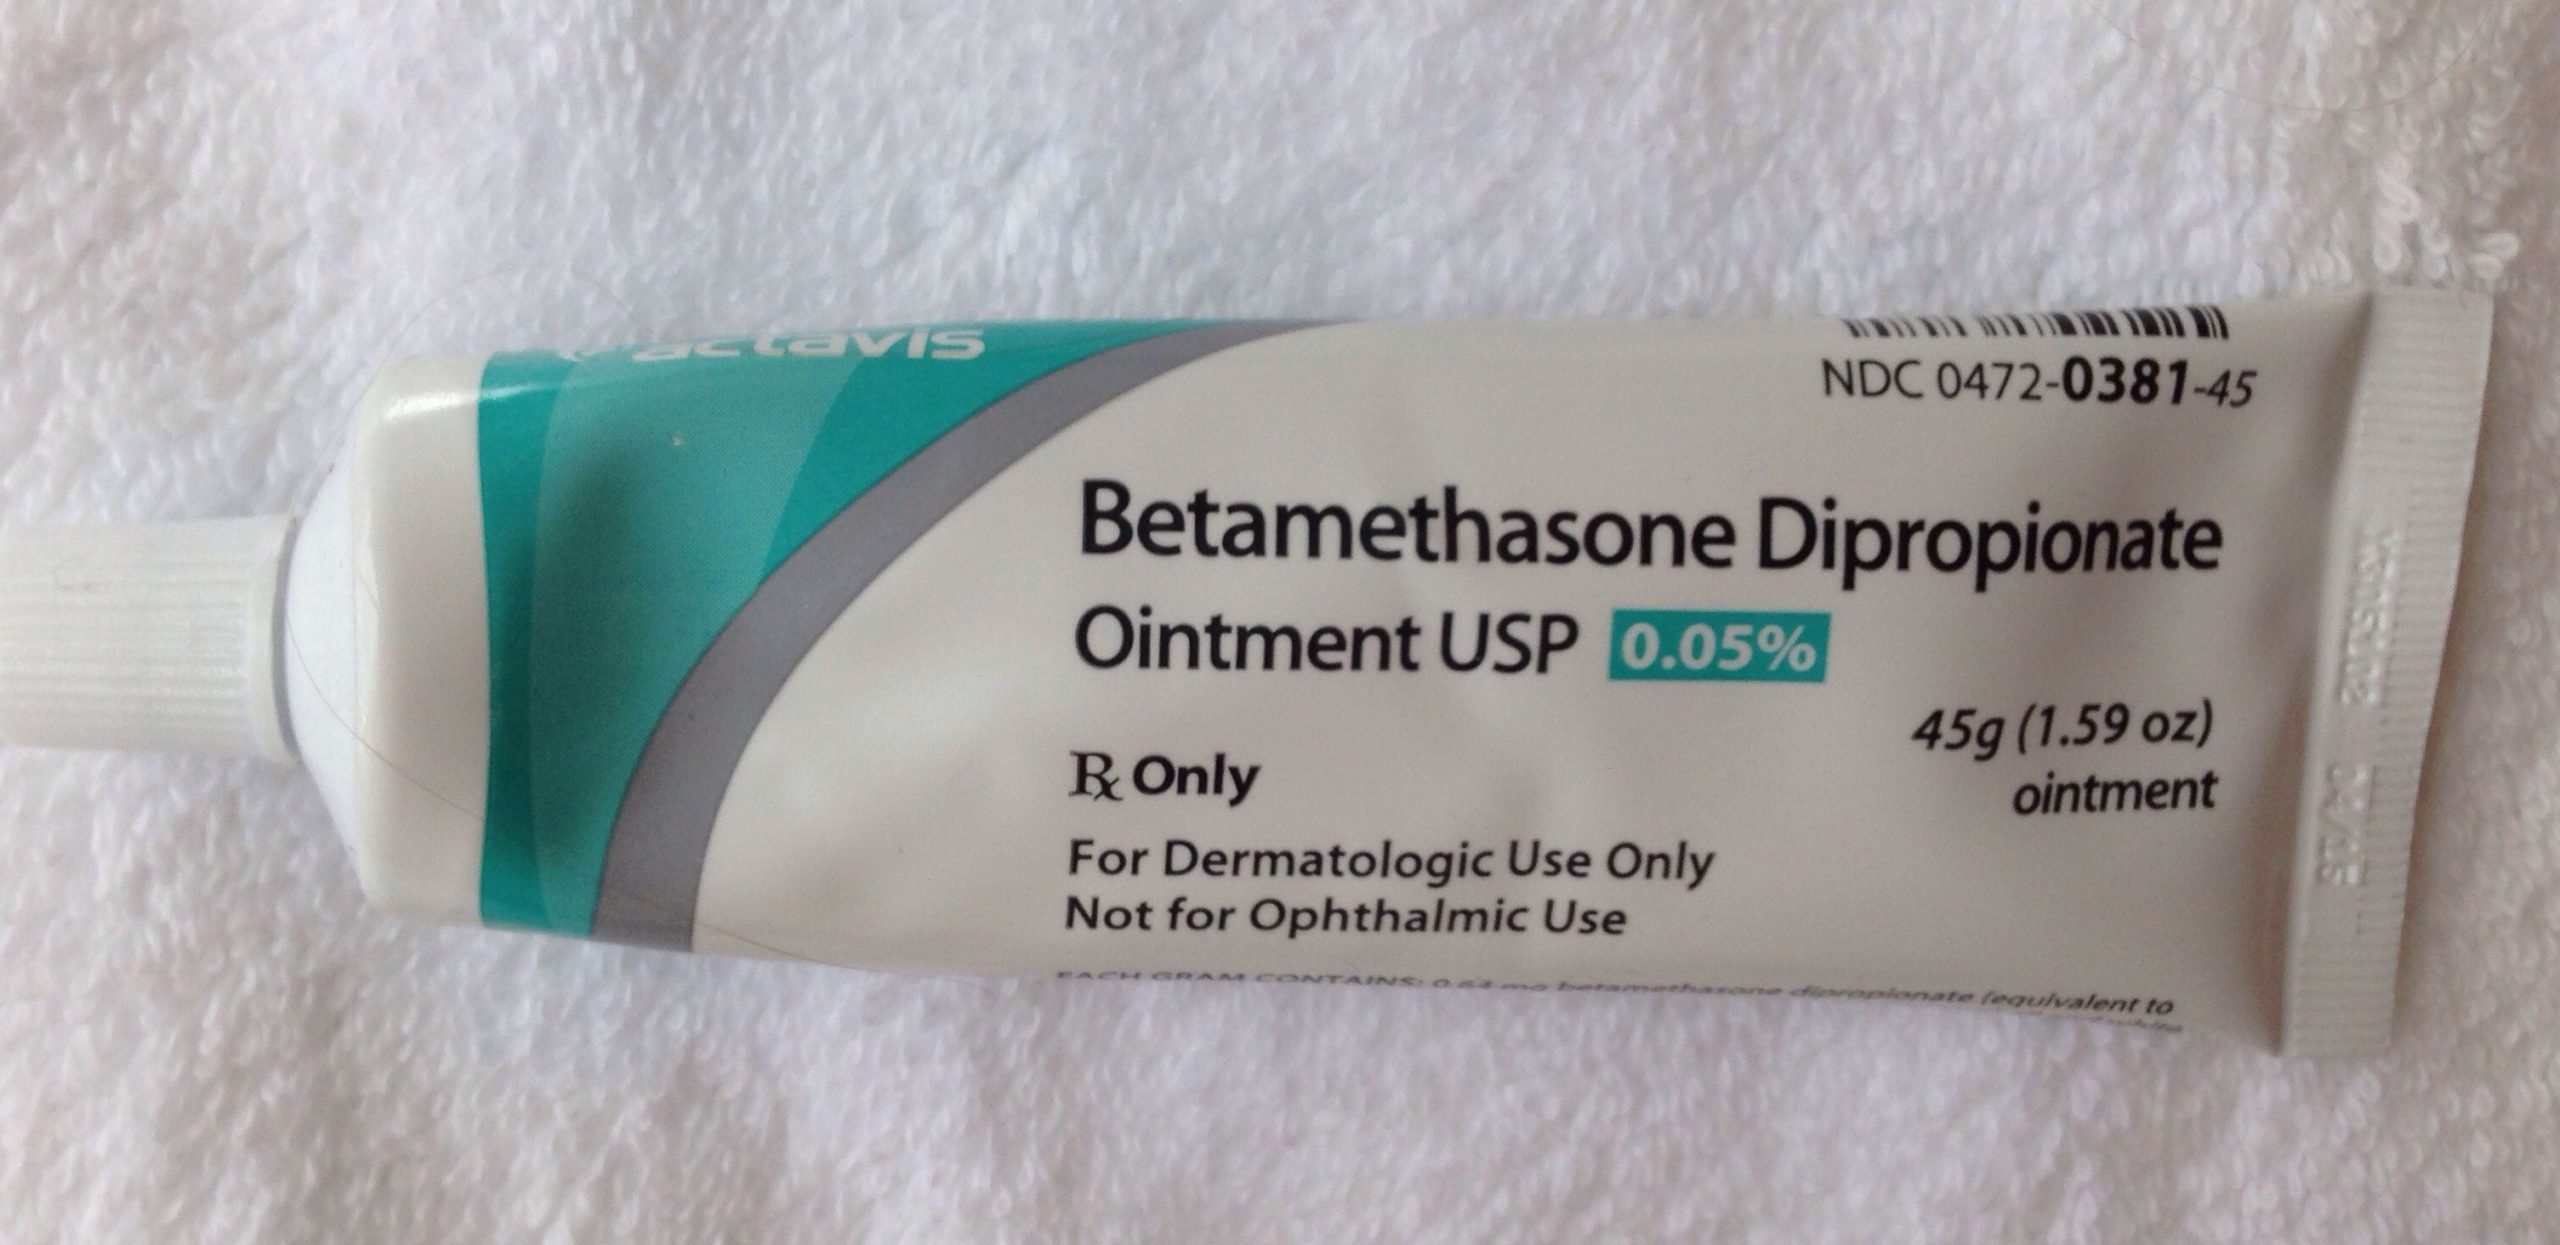 Betamethasone Dipropionate OINTMENT. Used sparingly after a HOT soaking ...